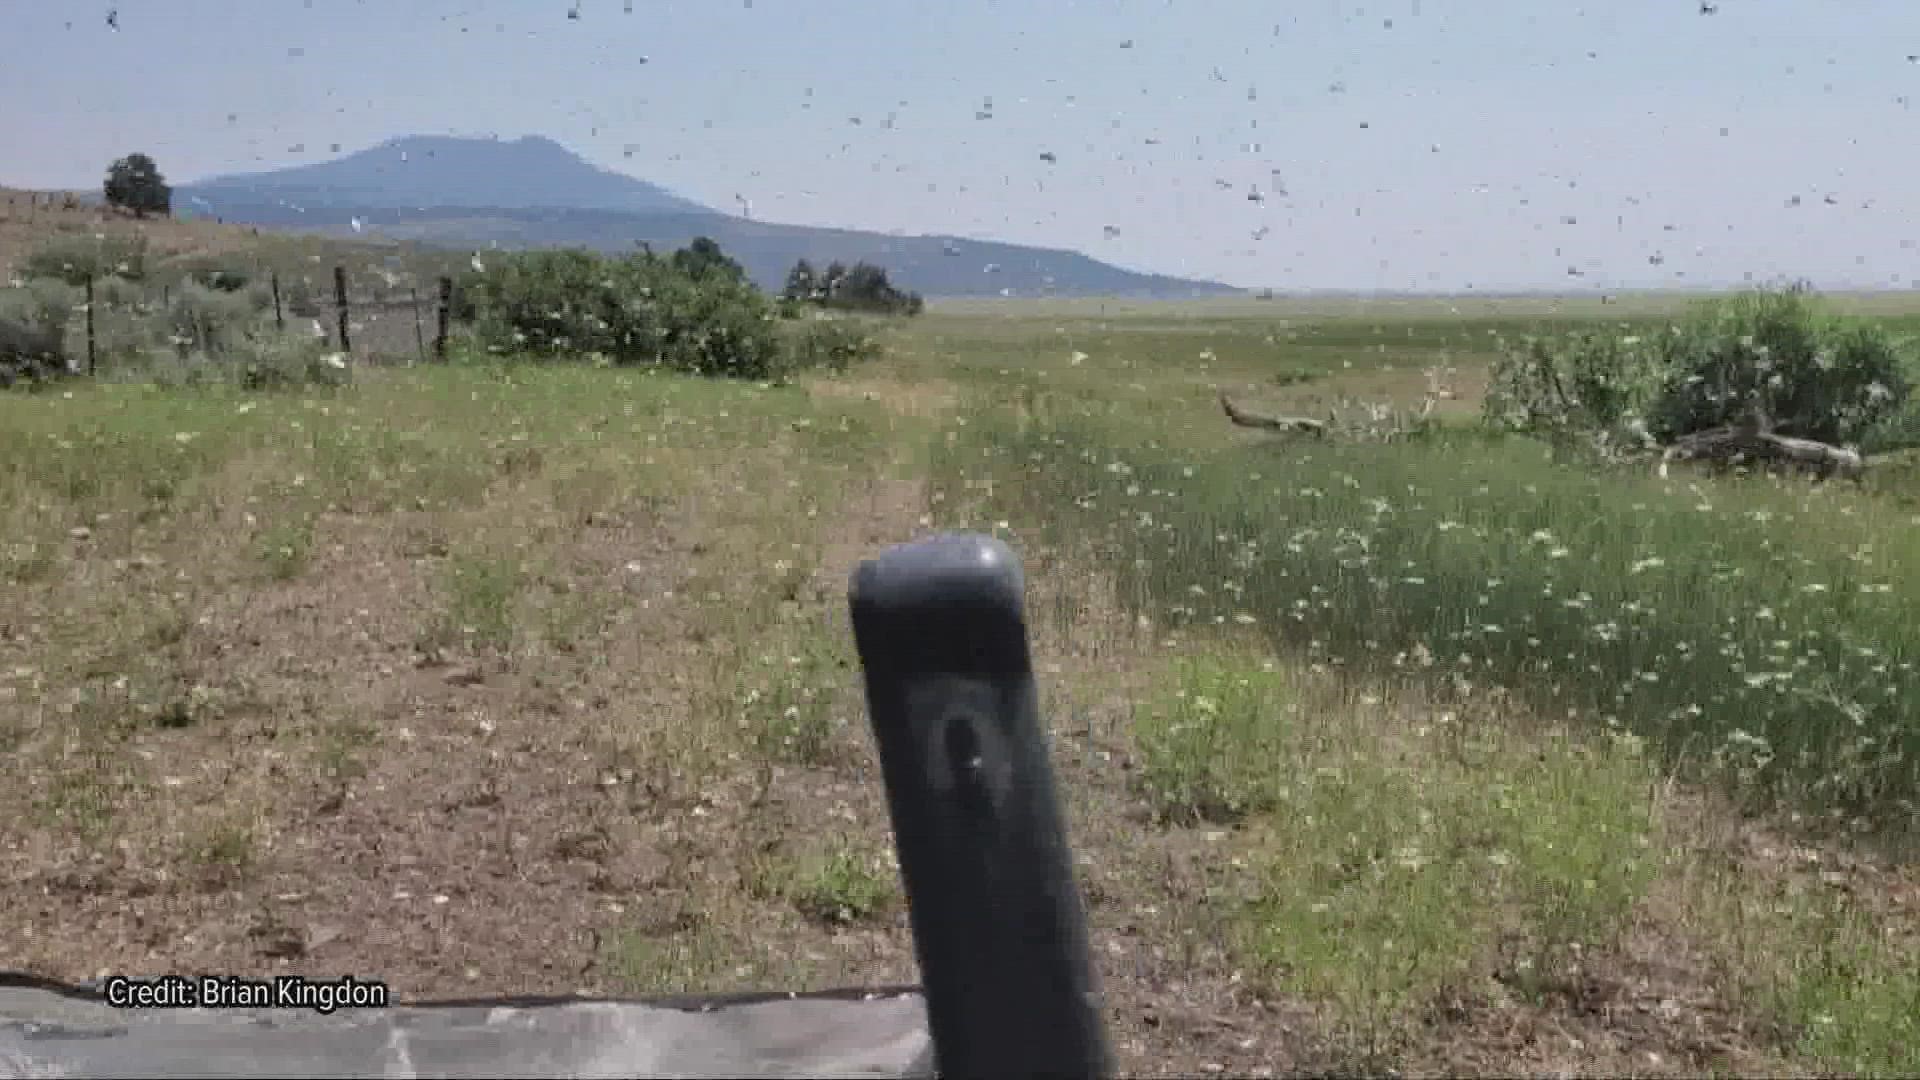 A very warm and dry spring has caused grasshopper populations to skyrocket, and the pests are mowing down farmland in the state.